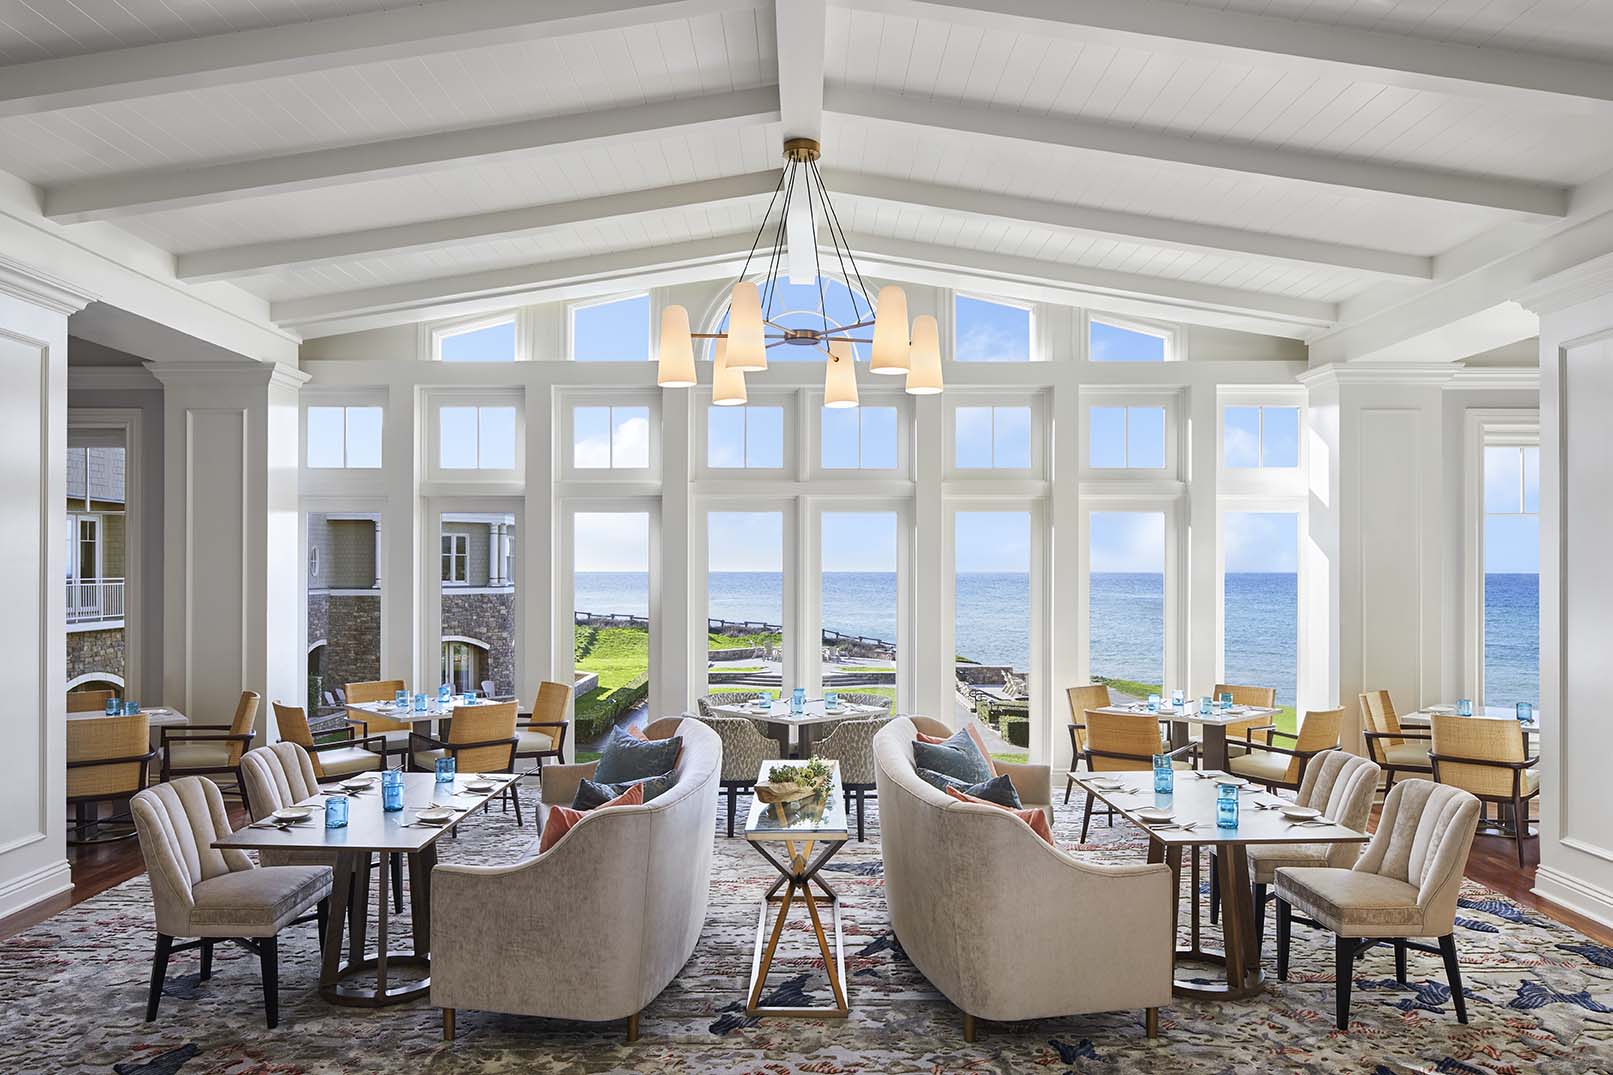 The Conservatory at The Ritz-Carlton, Half Moon Bay serving  homegrown, handcrafted California cuisine.